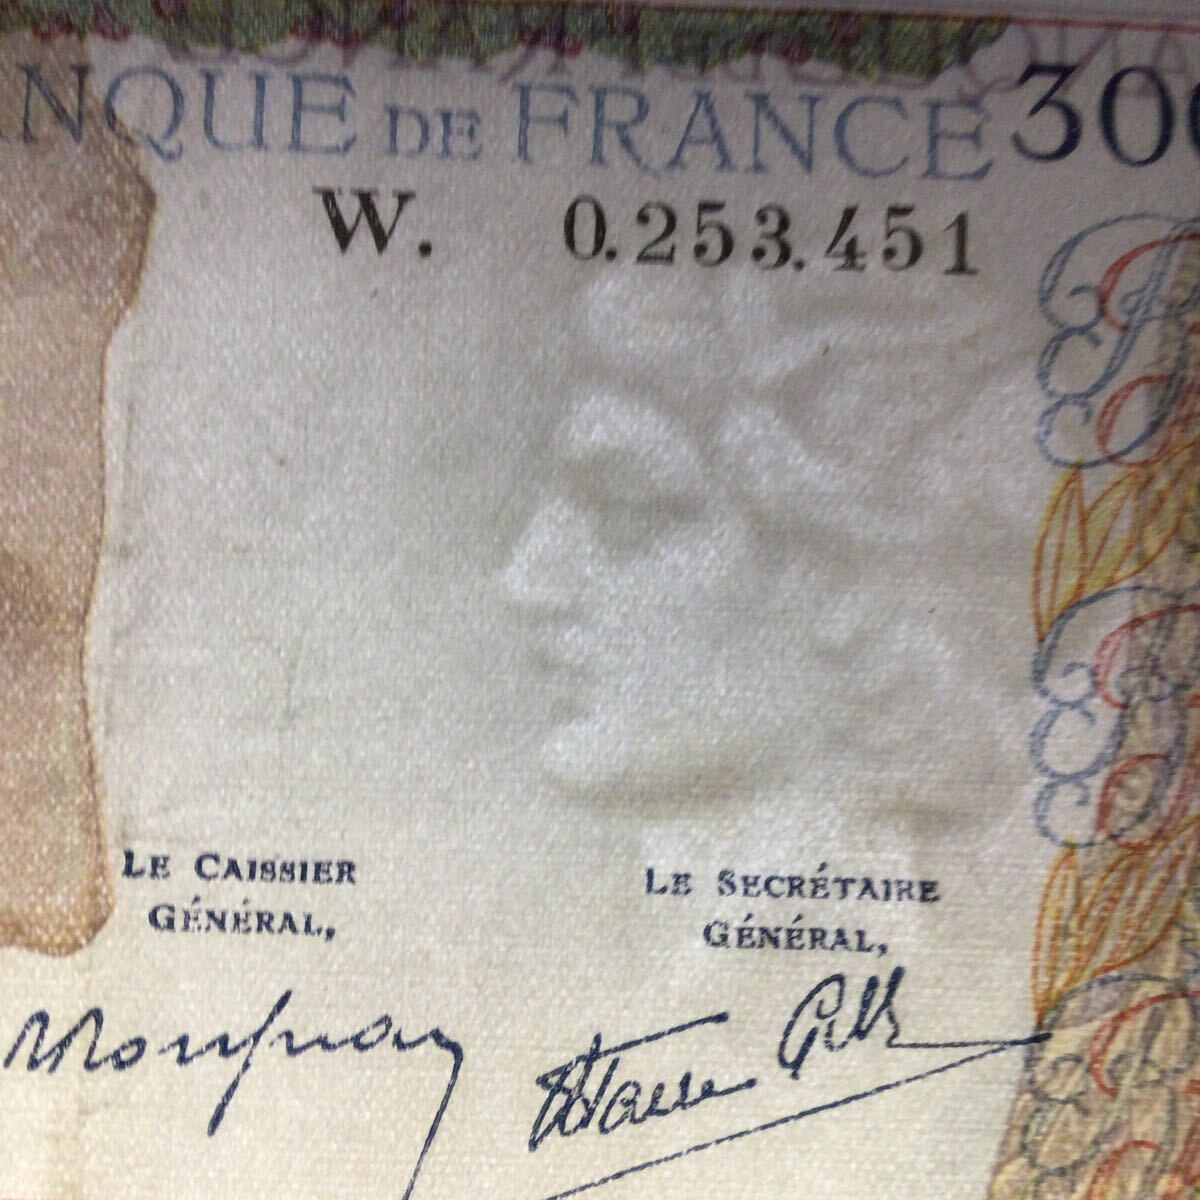 World Banknote Grading FRANCE《Banque de France》300 Francs〔Replacement〕【1938】『 PMG Grading About Uncirculated 50 NET』_画像3